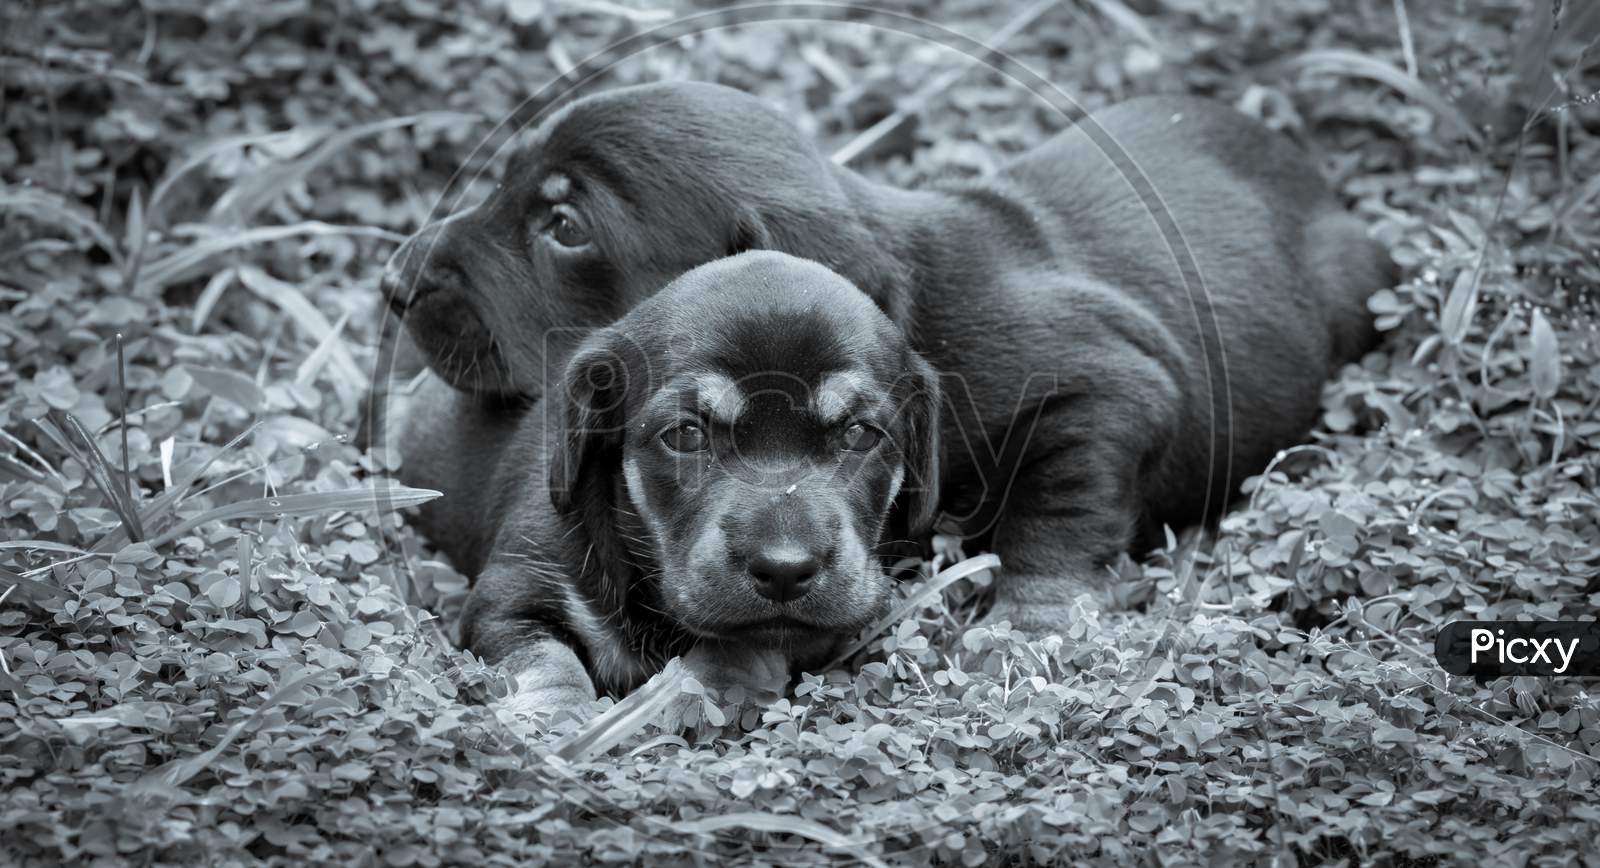 Cute Dachshund Puppies Lying In The Backyard, Cuddle And Play With Newborn Siblings, Explore, Watch And Learn The Environment, Taking Care Of Each Other Concepts, Both Shivering And Share The Warmth.